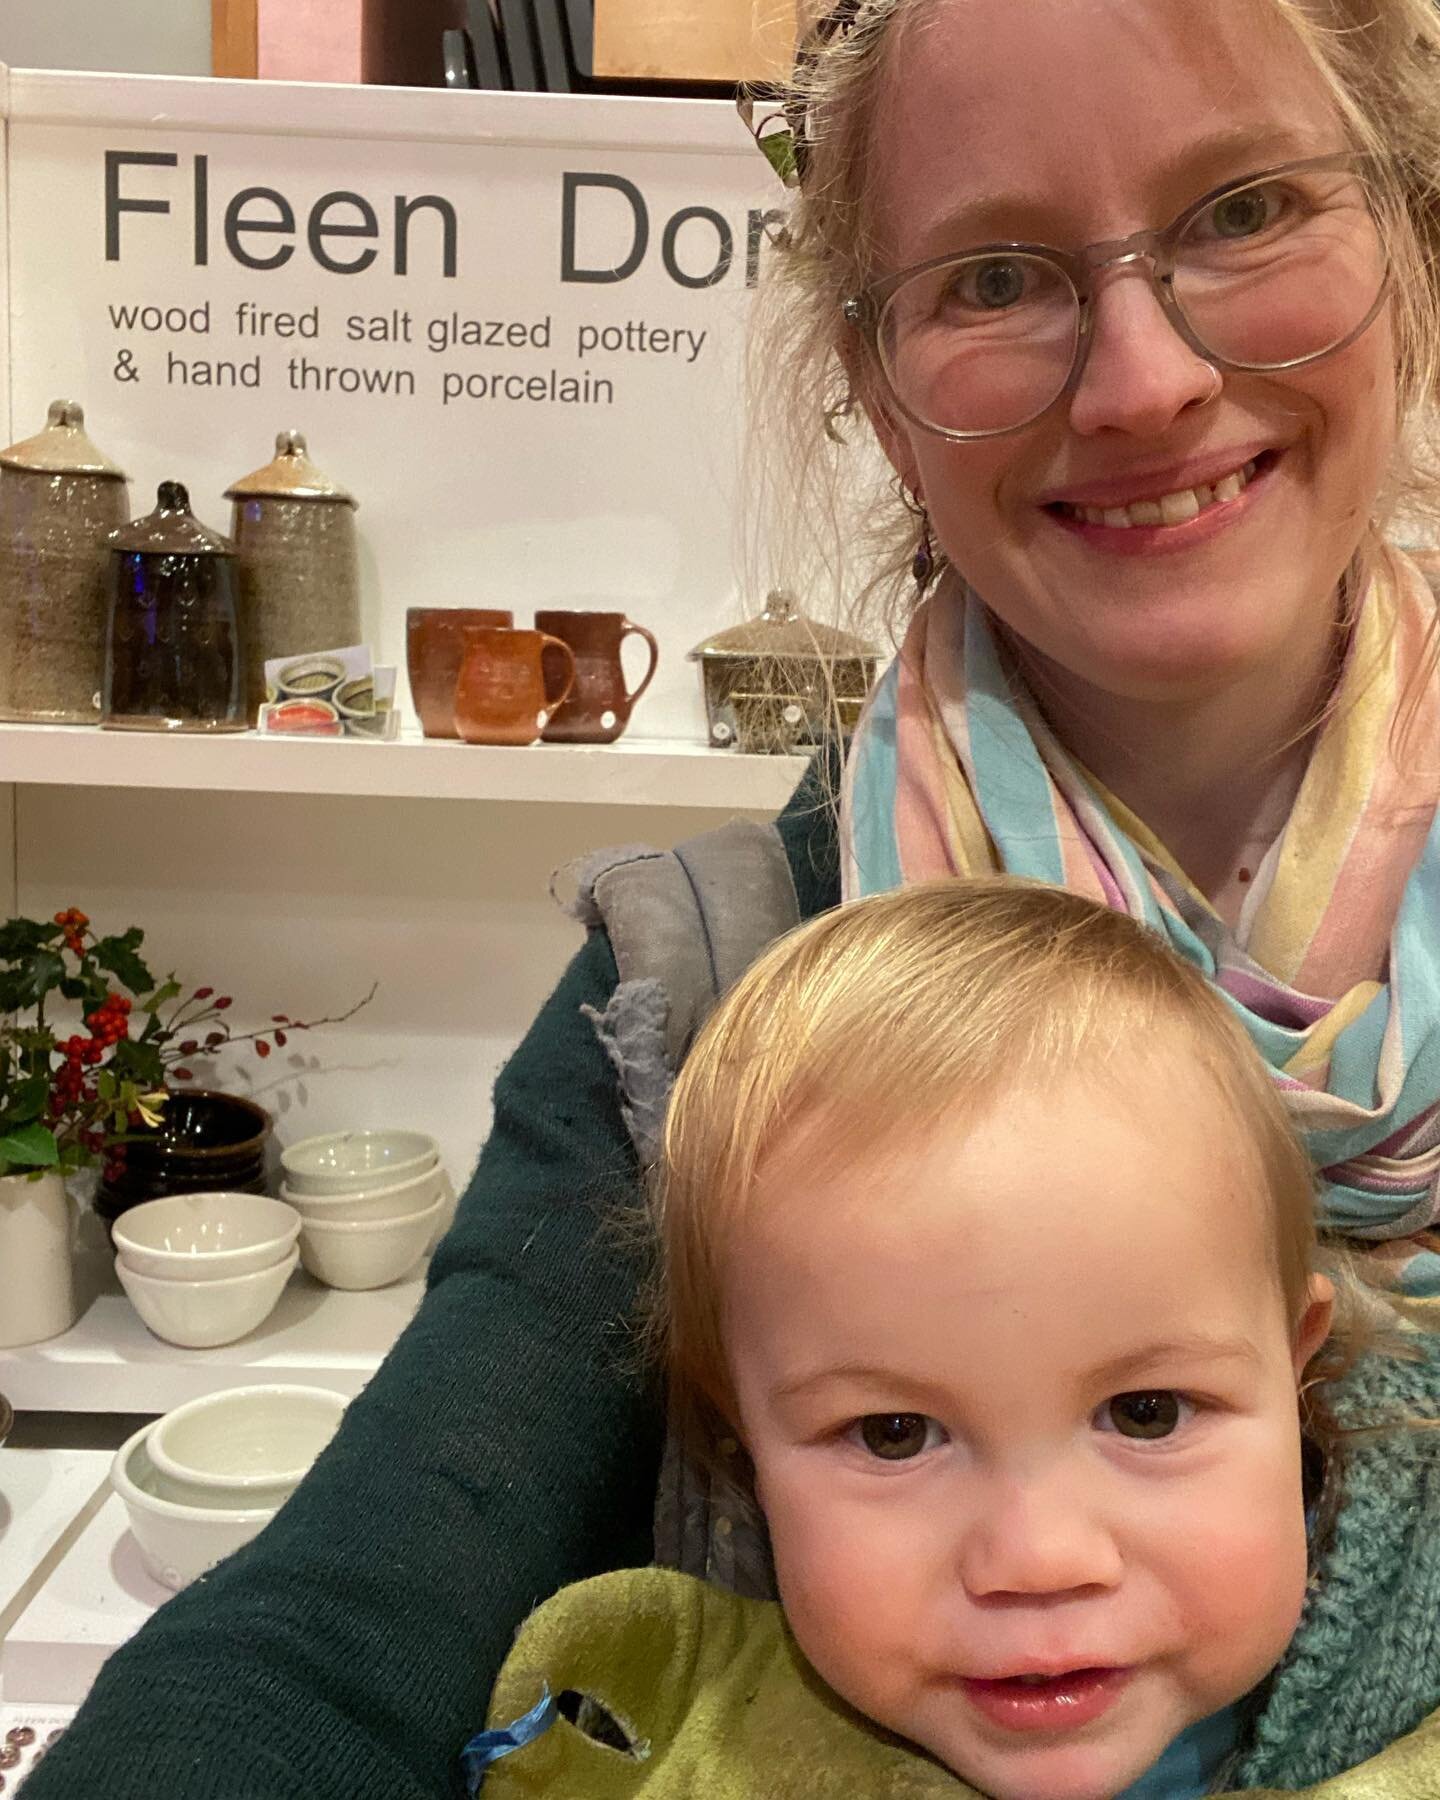 A fab night out with the pottery (and my tiny helper of course) 🥰at The Advent Fair at @steineracademyevents looking forward to more tomorrow! Thanks everyone who called by my stall with kind words and purchases 🥰